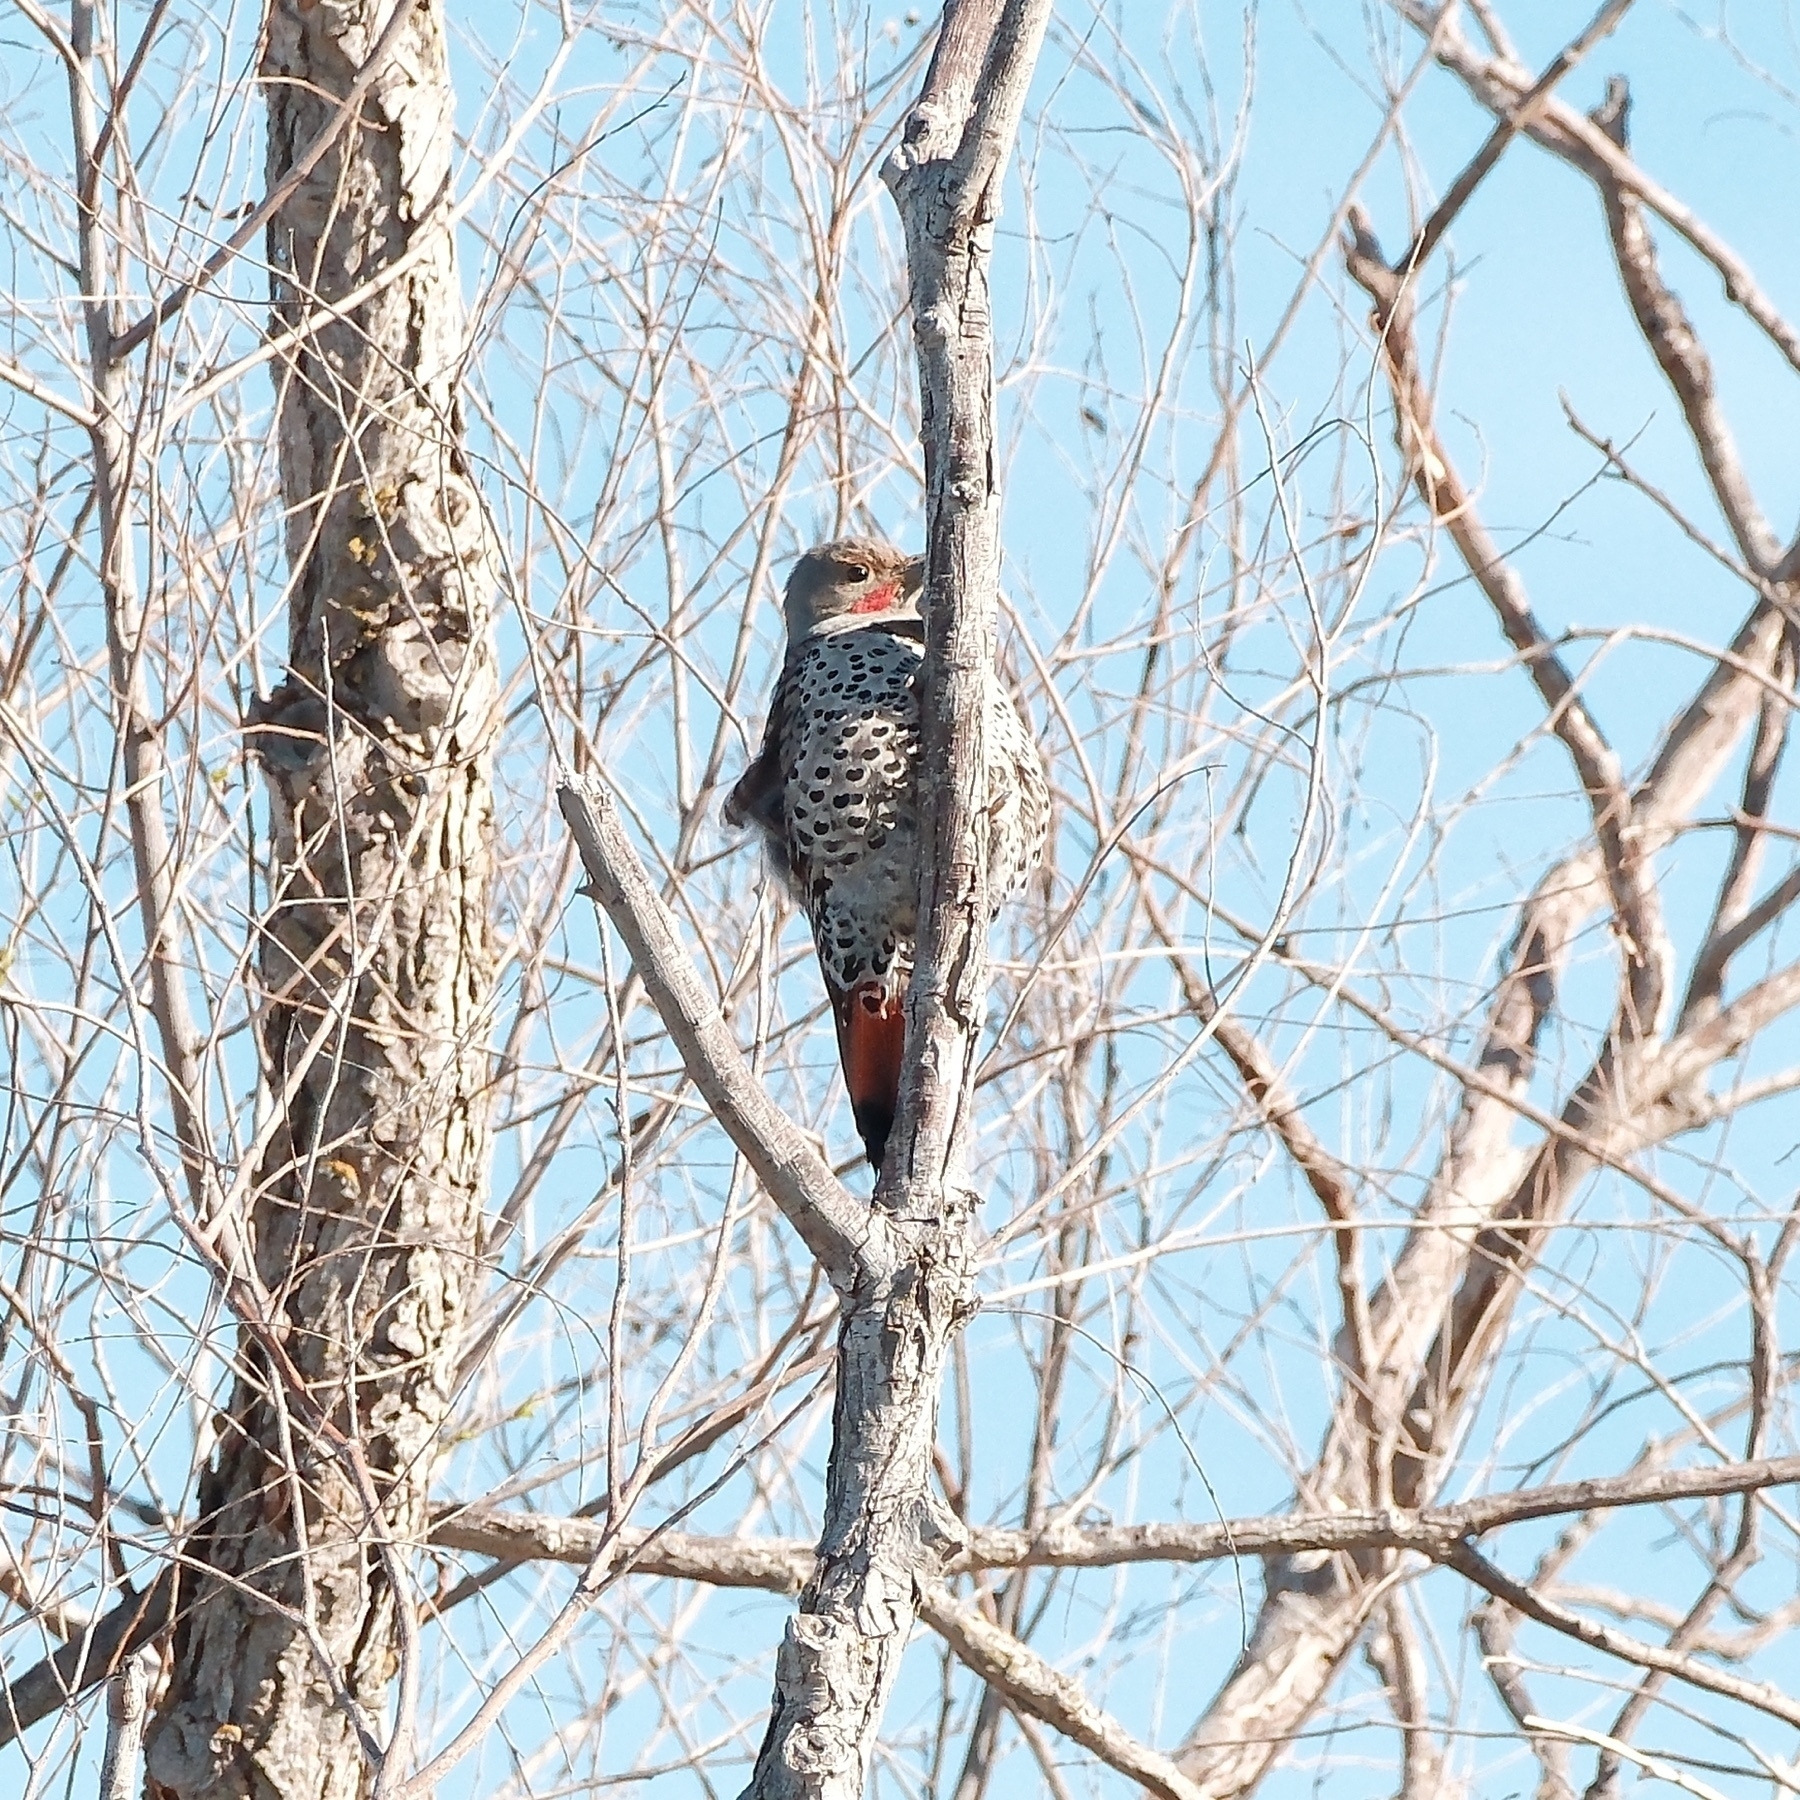 Northern Flicker up in a tree, vertical against a vertical branch. The Flicker has red on its chin and its tail. It has black heart shaped markings on its gray chest.